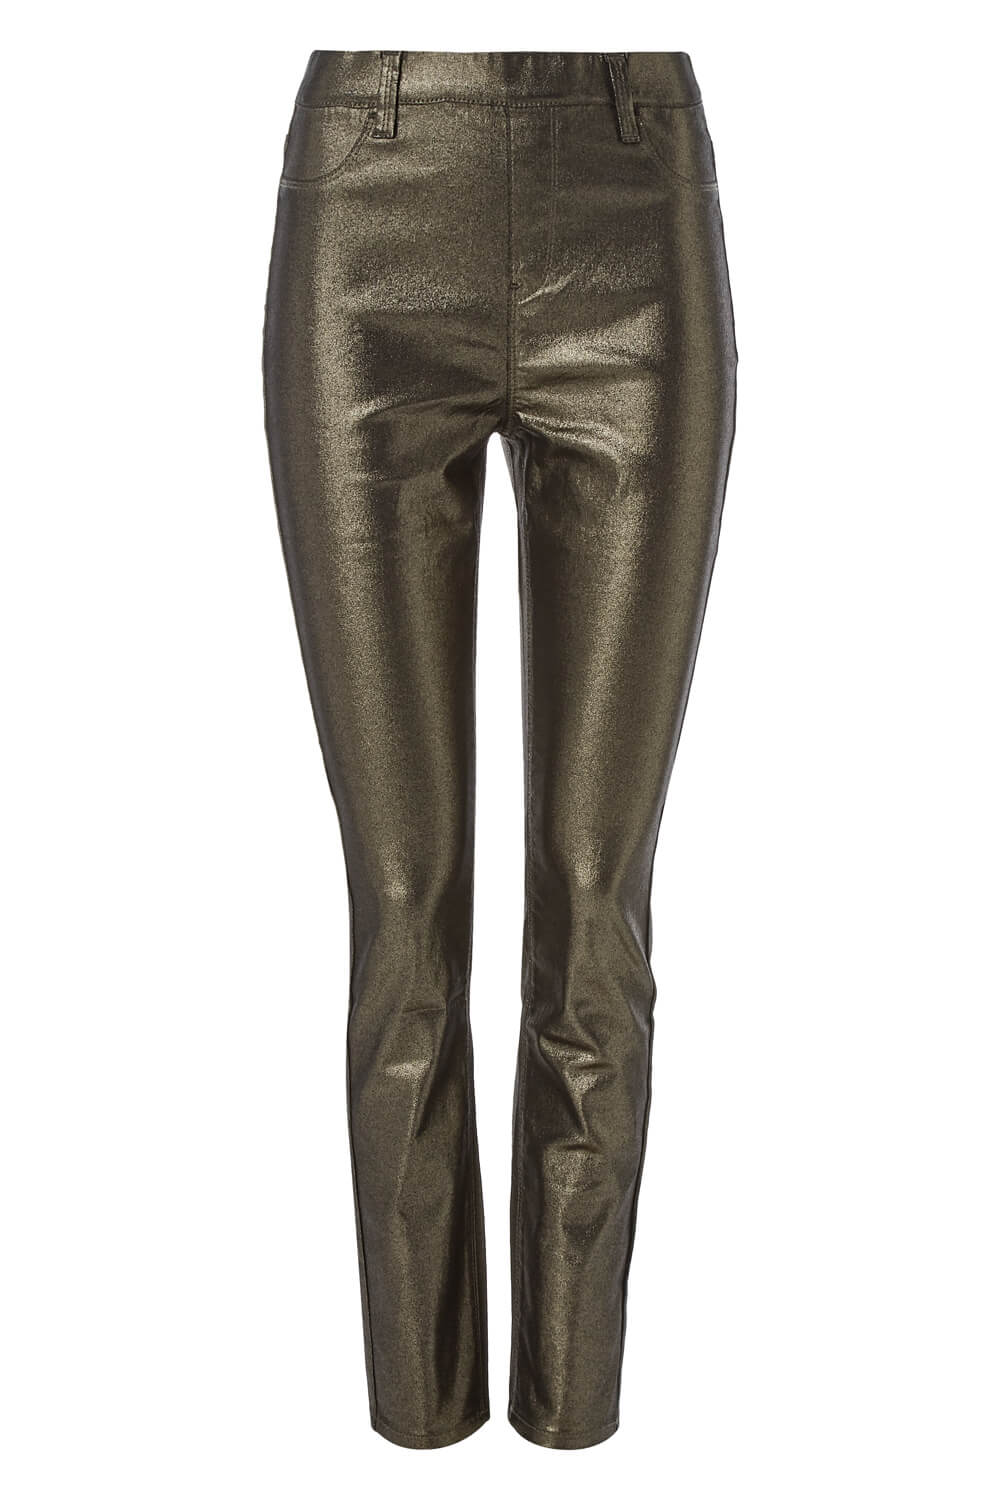 Glitter Faux Leather Trousers in Gold - Roman Originals UK